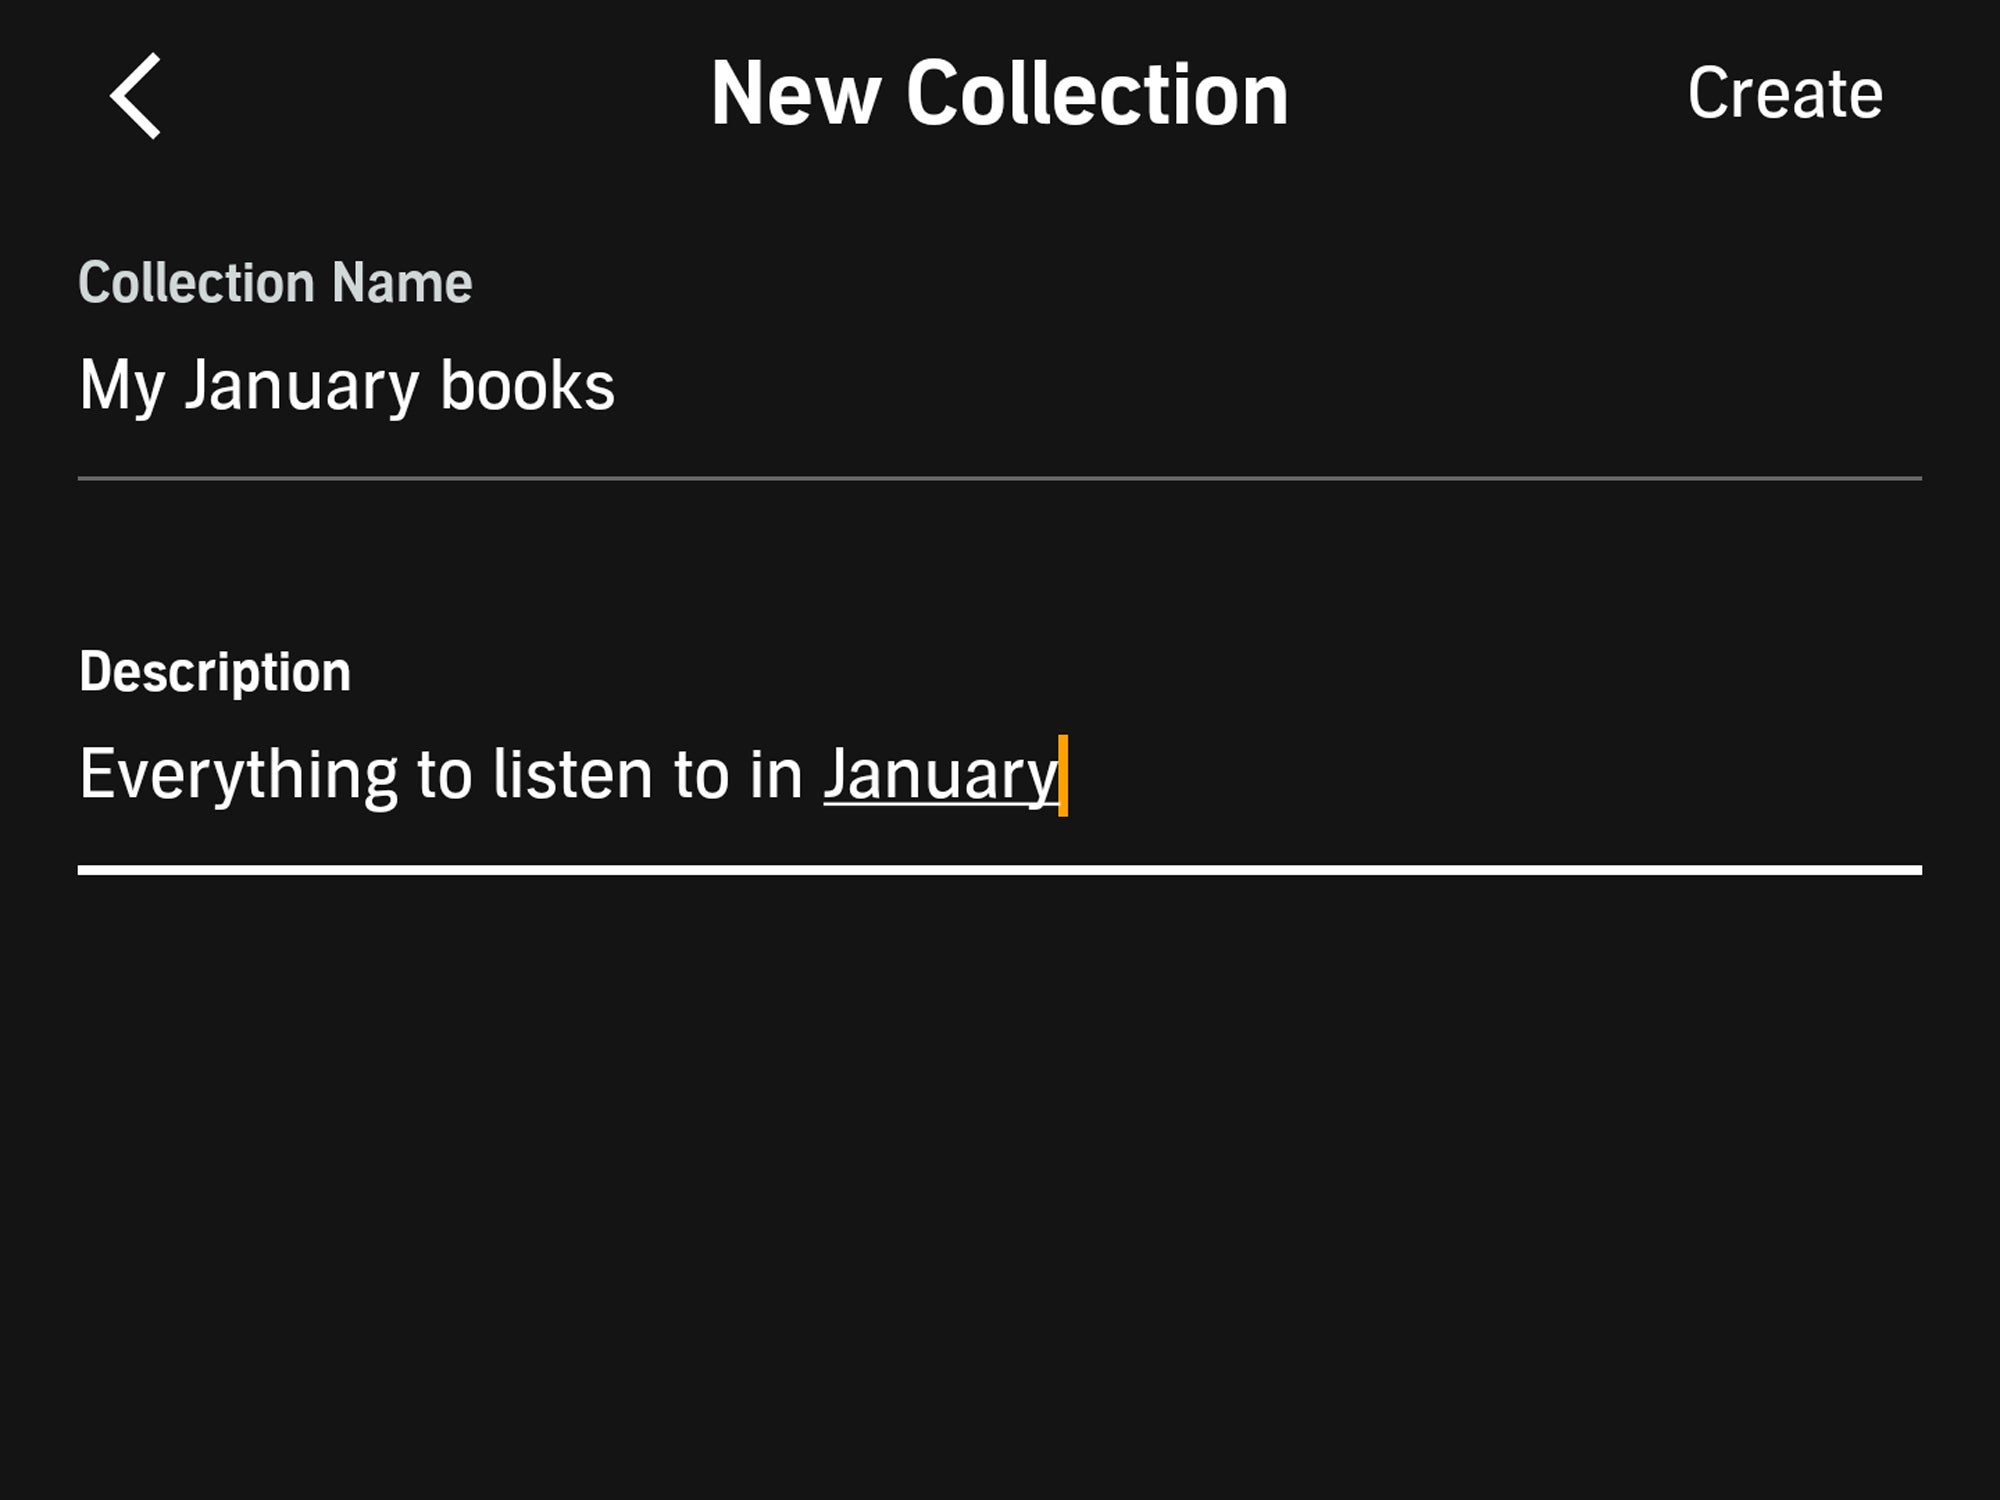 An Audible collection of books to read in January.